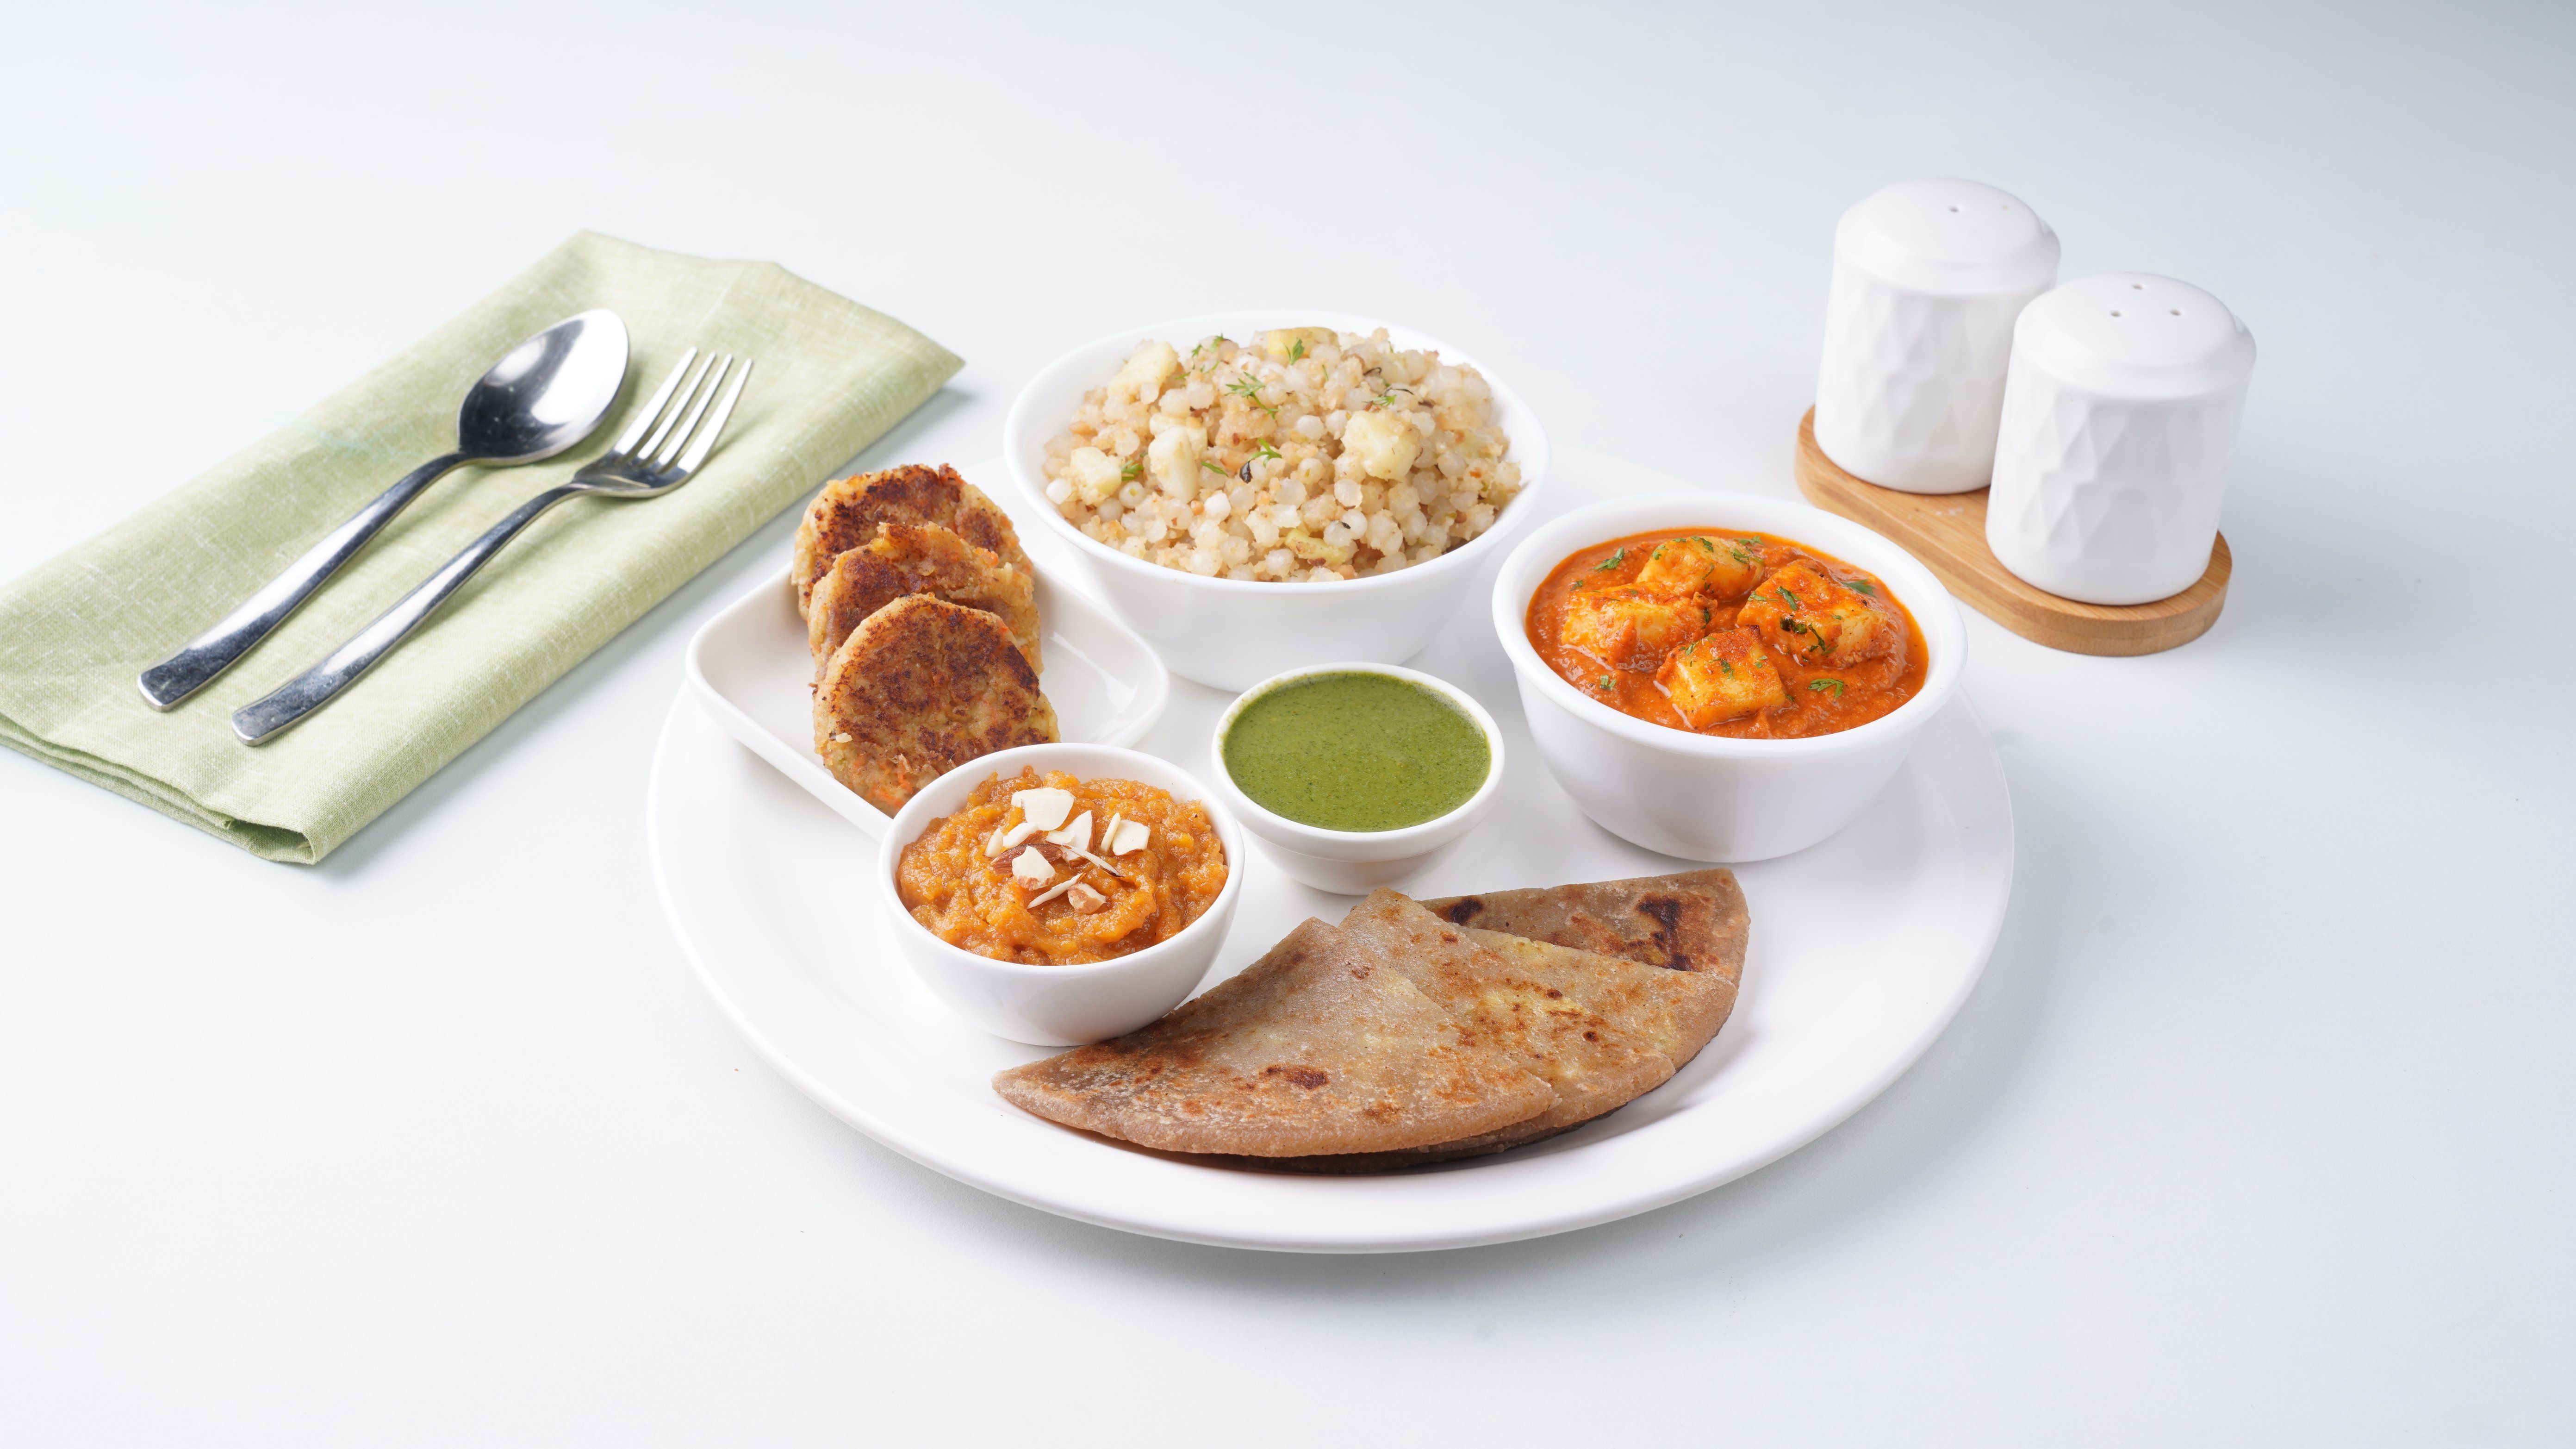 Pure Veg Meals by Lunchbox in Manesar, Gurgaon